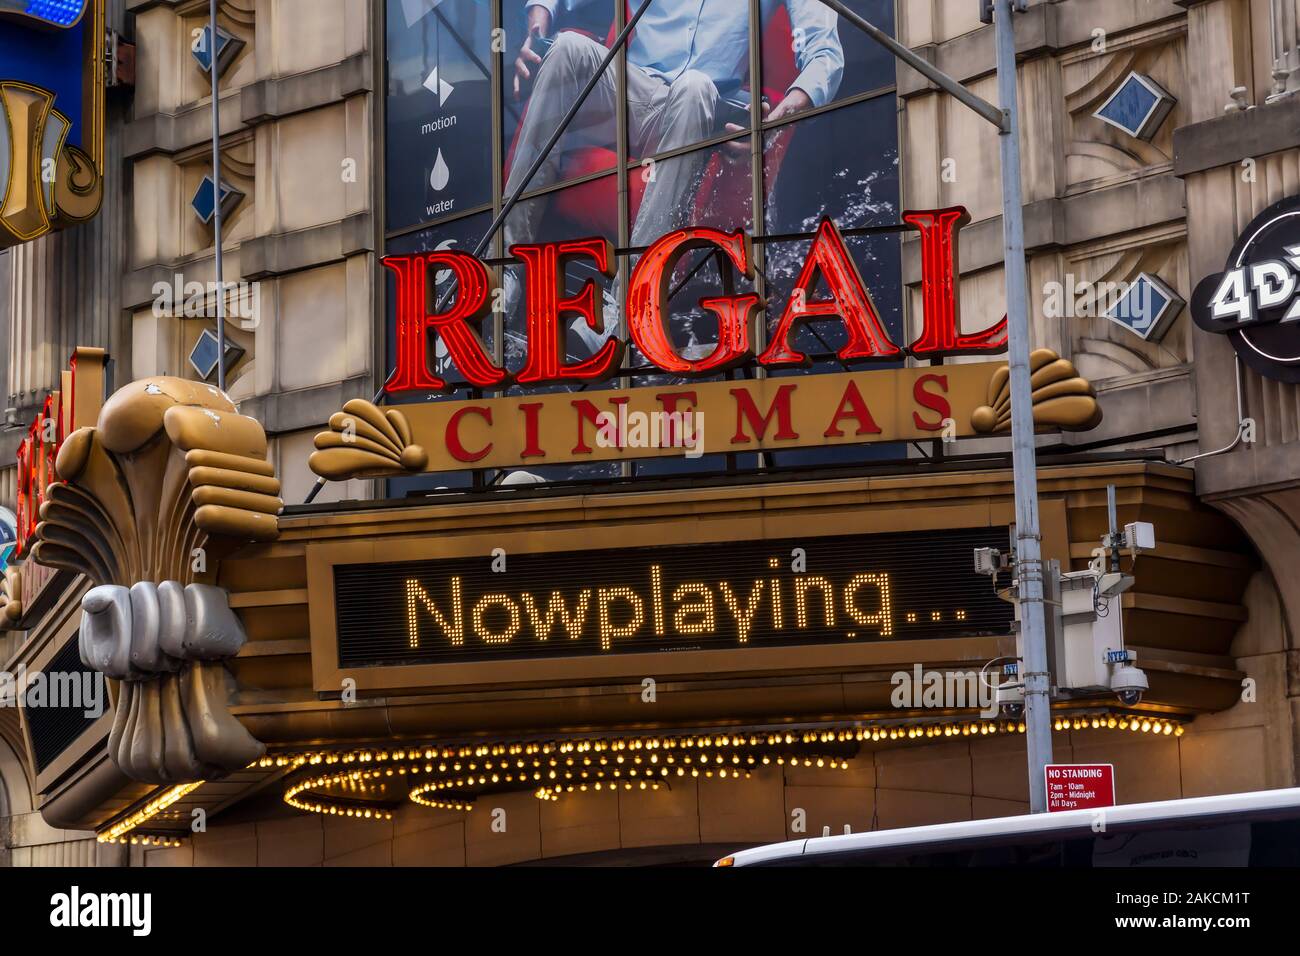 The Regal Cinemas in Times Square in New York are seen on Sunday, January  5, 2020. Box office gross for 2019 was $ biliion, less than 2018 at  $ billion, despite the